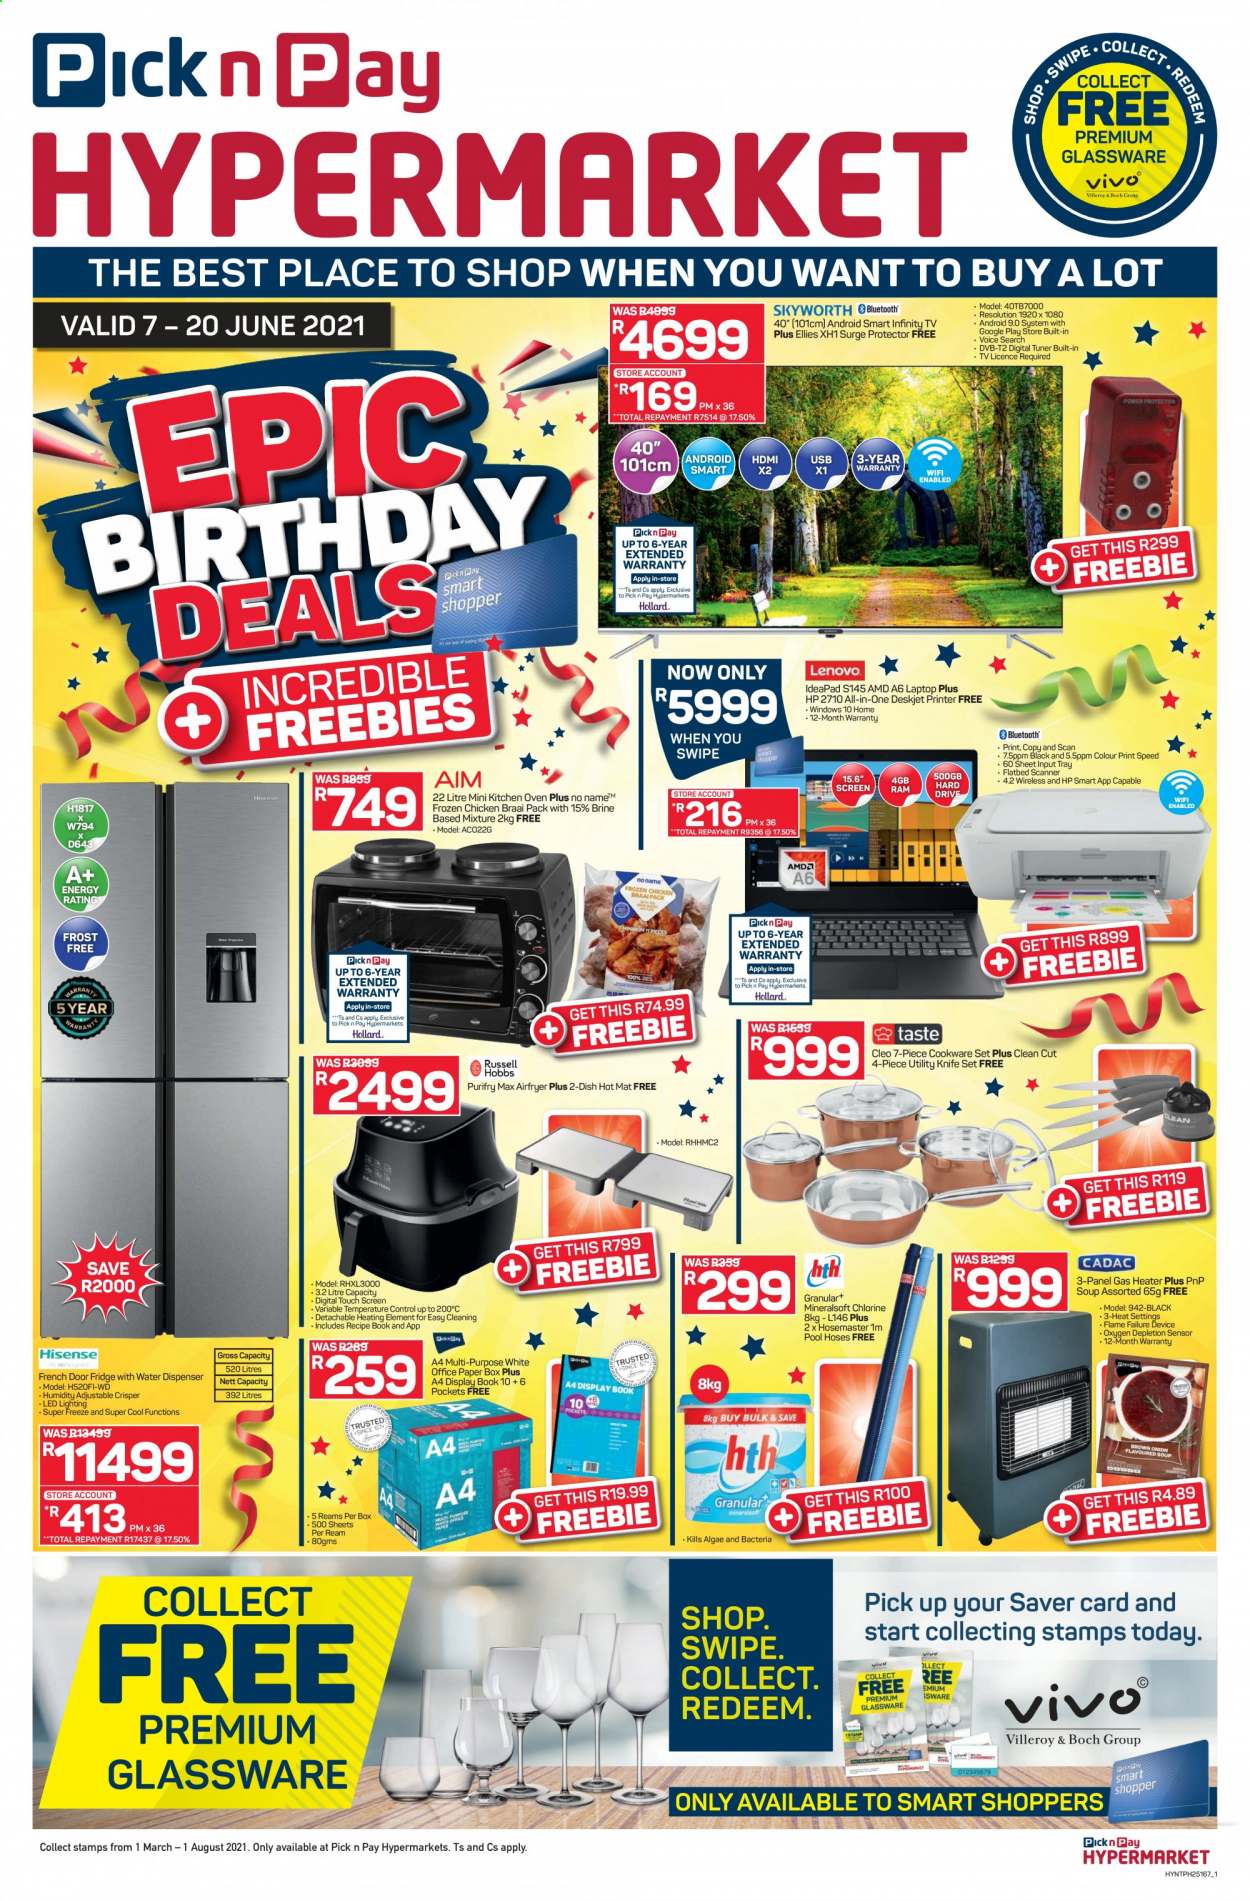 Pick n Pay specials - 06.07.2021 - 06.20.2021. 